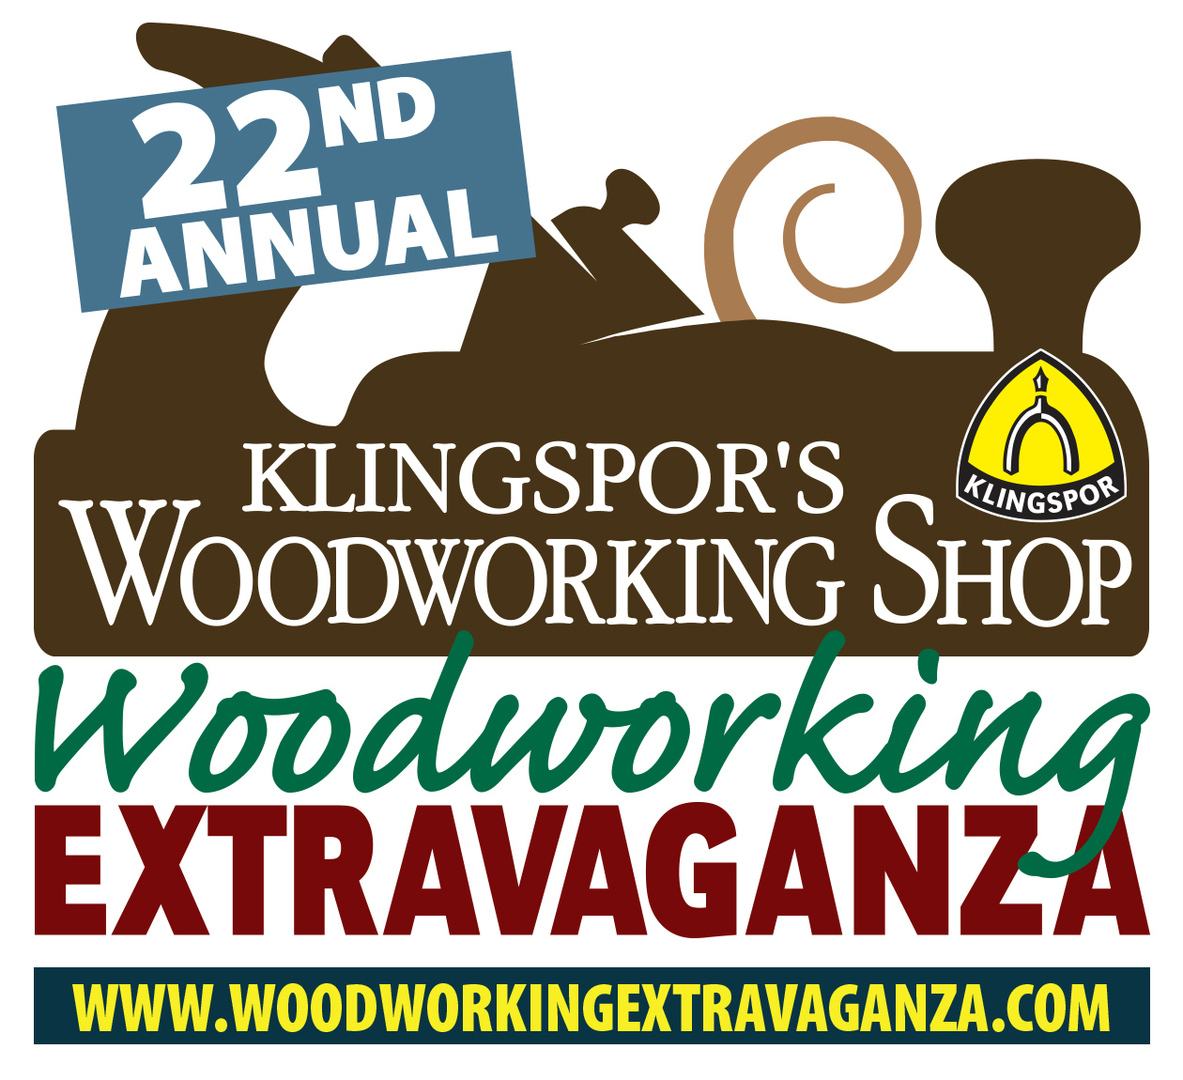 Klingspor's 22nd Annual Woodworking Extravaganza Oct 21st and 22nd 2022, Hickory, North Carolina, United States